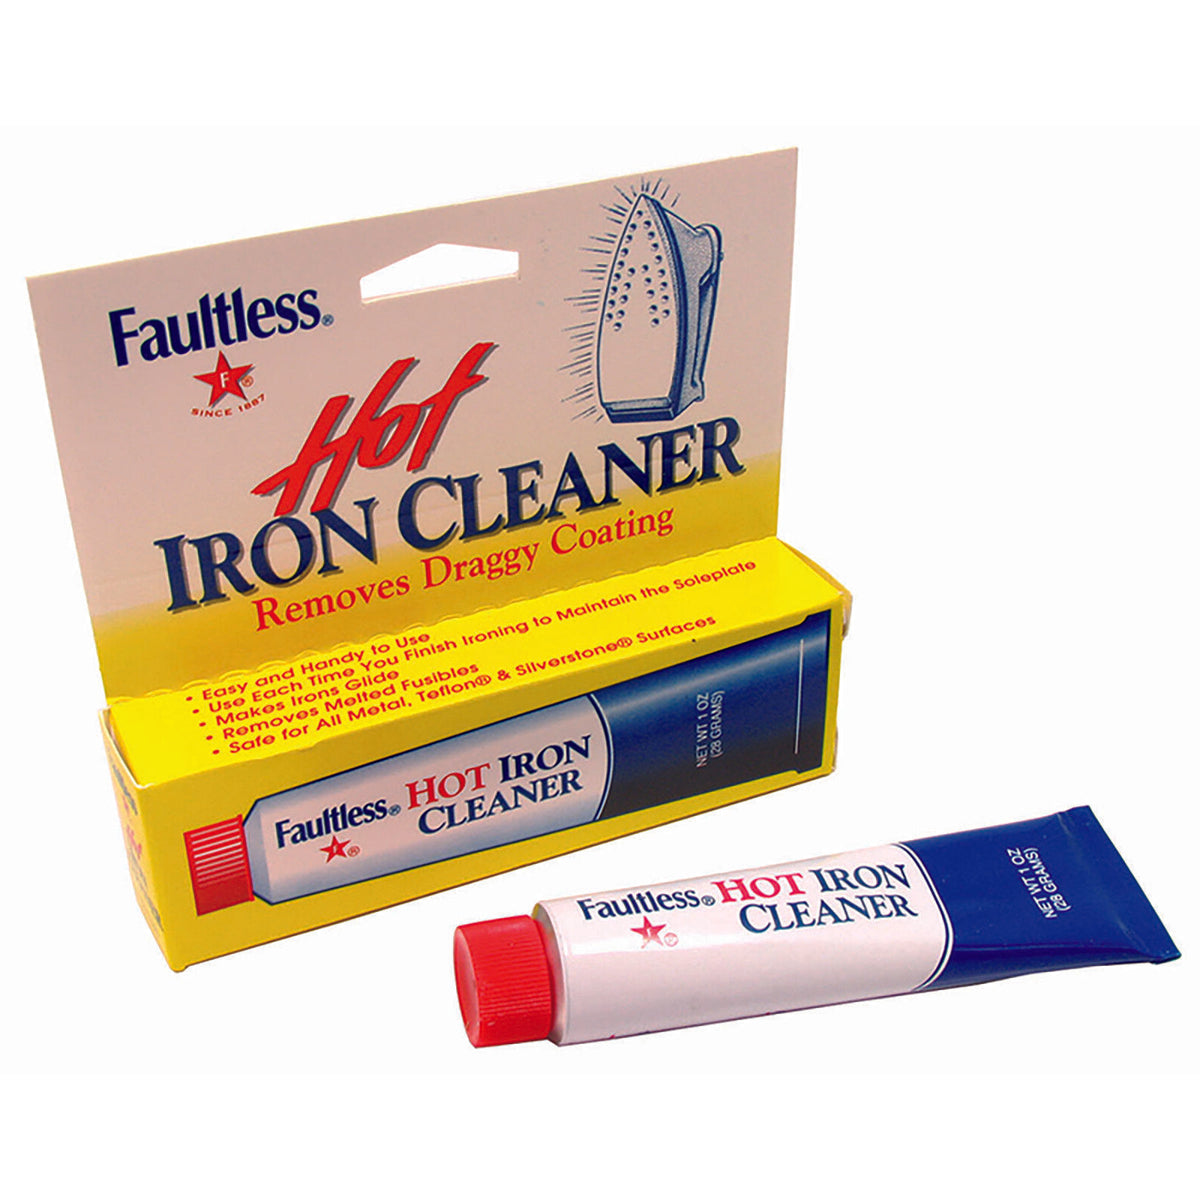 Faultless Iron Cleaner – Faultless Brands